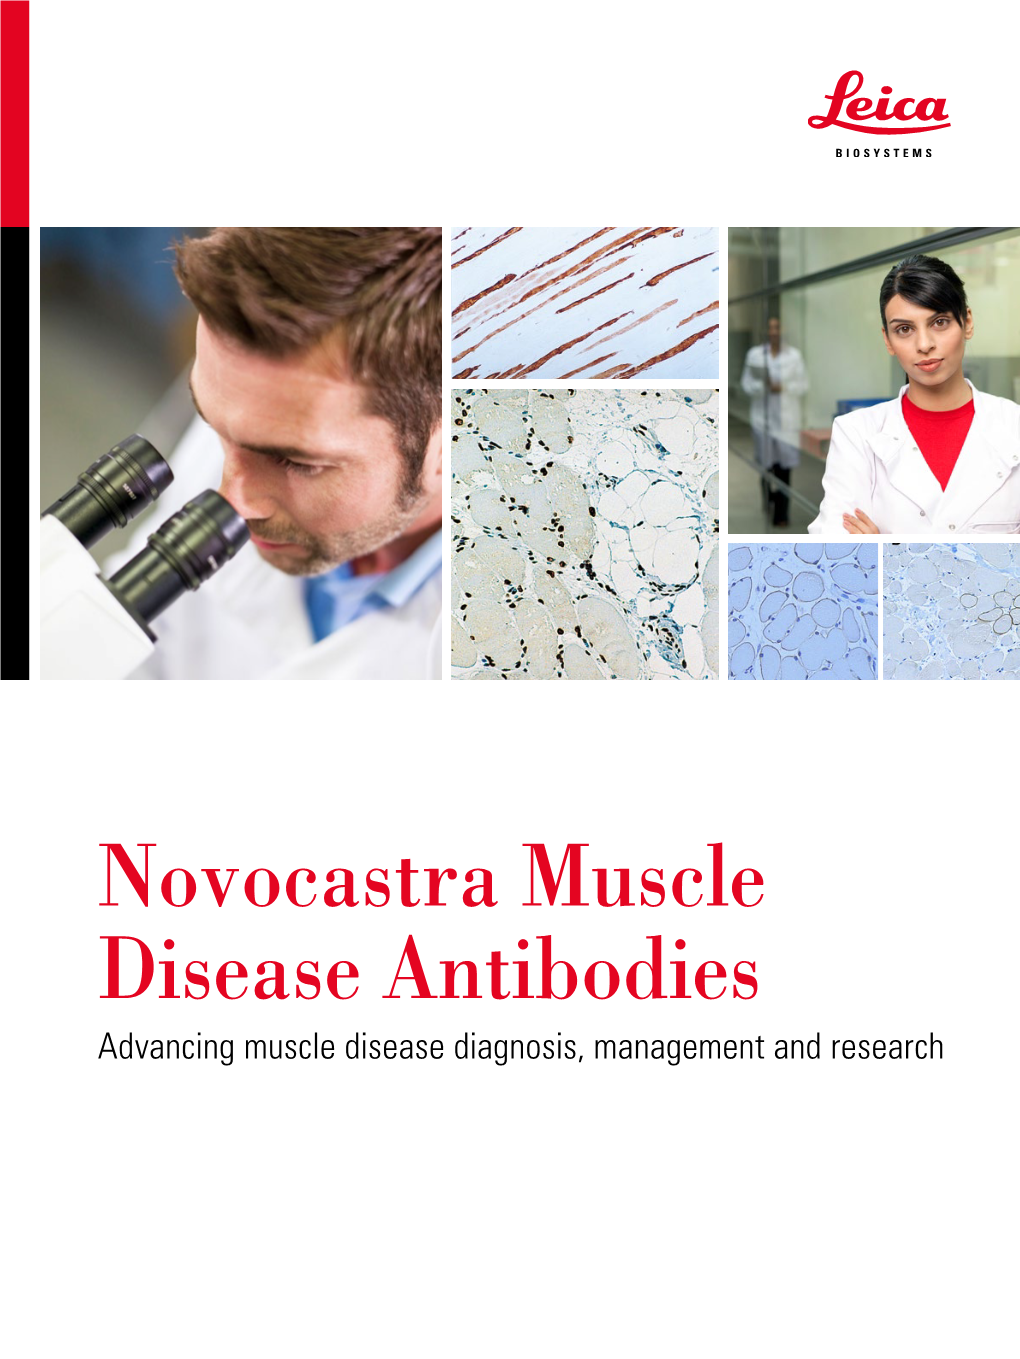 Novocastra Muscle Disease Antibodies Advancing Muscle Disease Diagnosis, Management and Research Novocastra Muscle Disease Antibodies